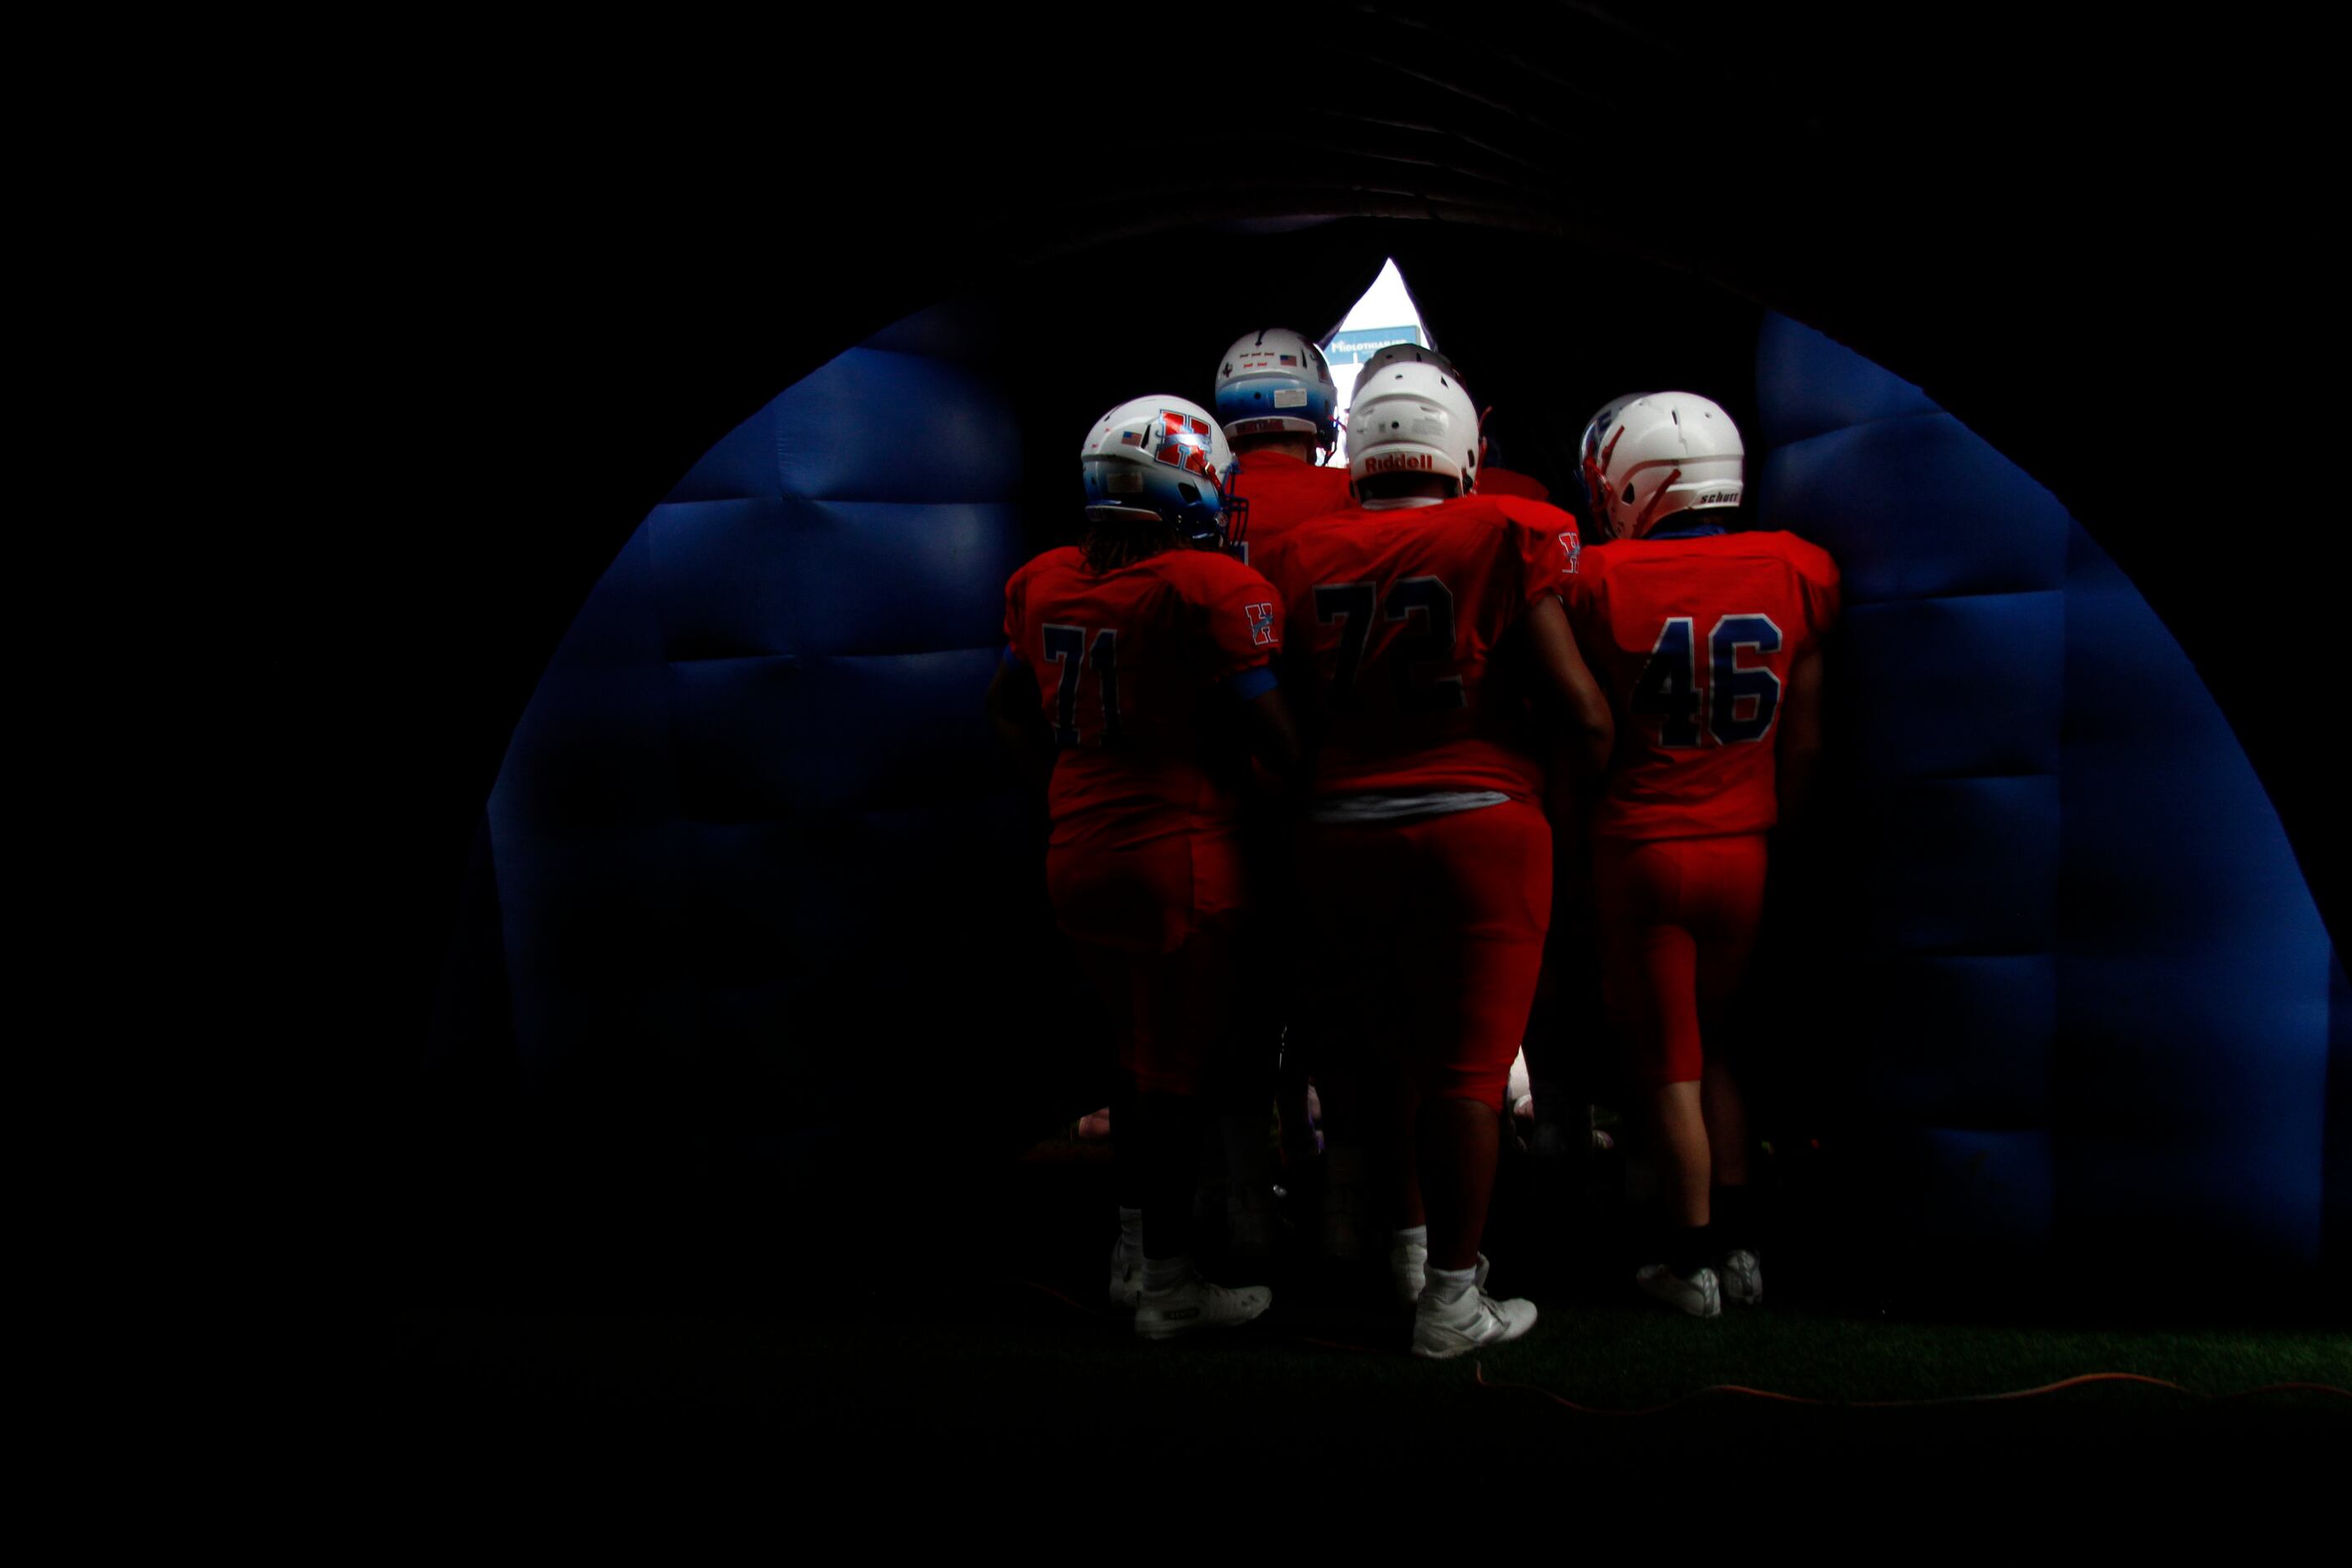 Midlothian Heritage players huddle near the opening of the team's inflatable as they await...